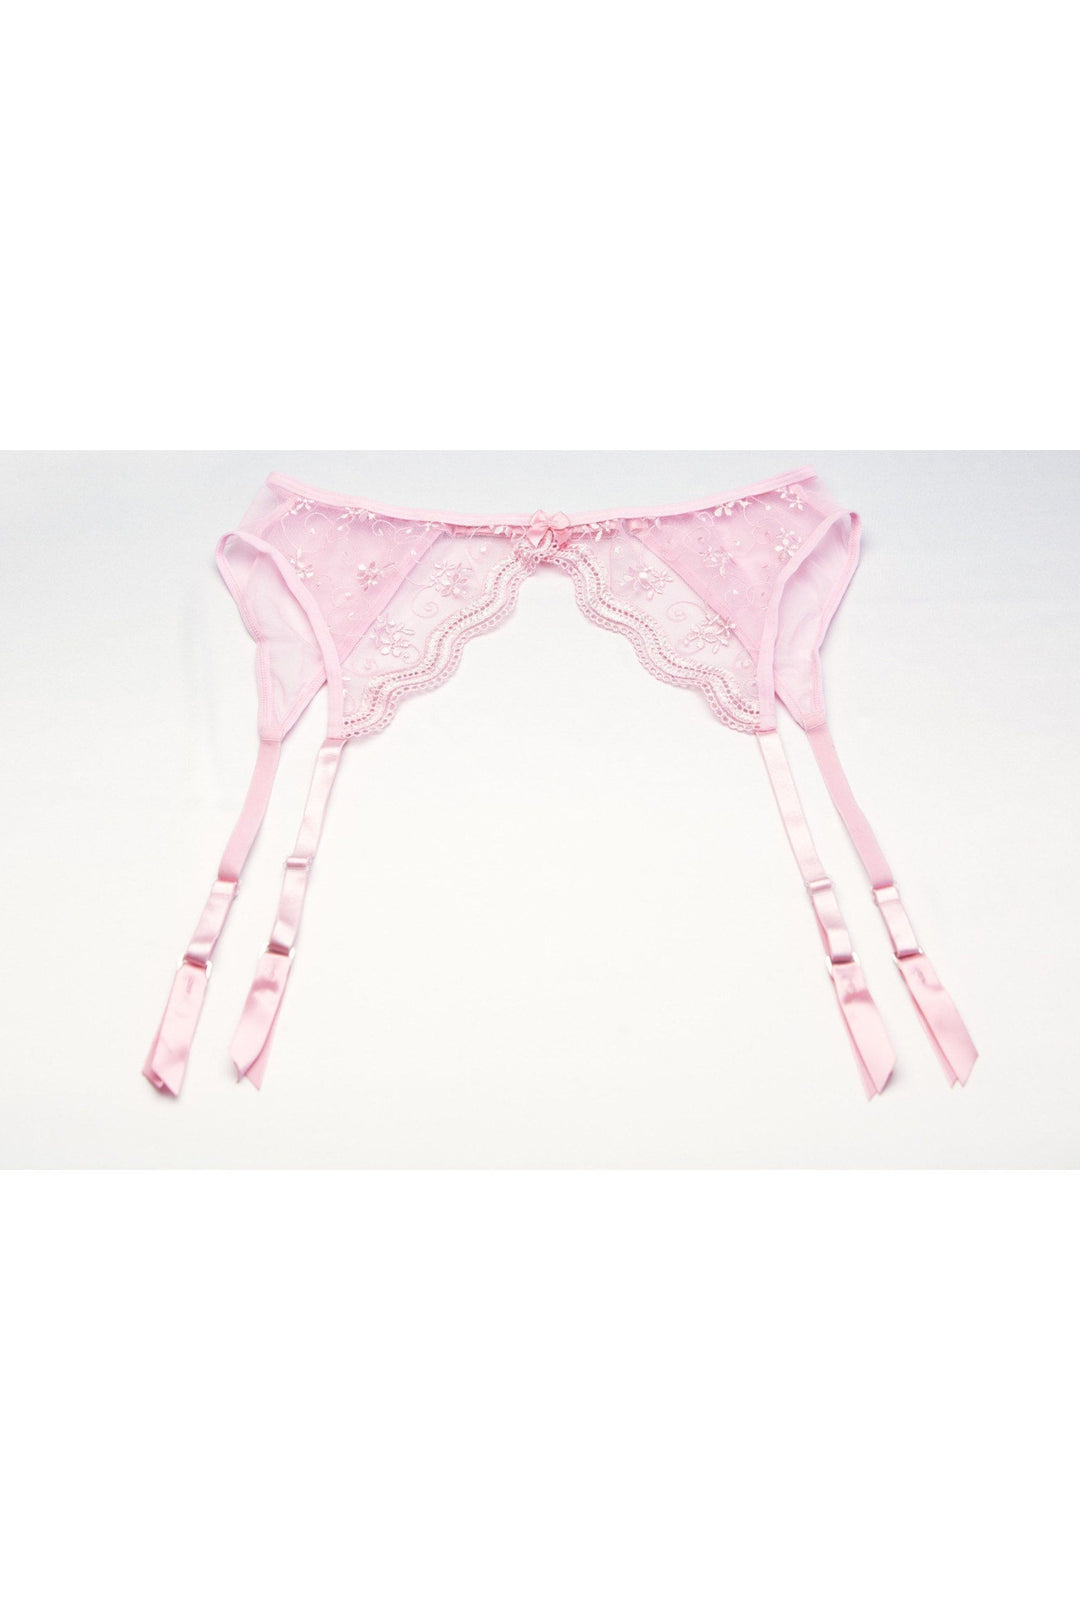 Scalloped Embroidered Garter belt | Plus Size-Intimate Attitudes-SEXYSHOES.COM